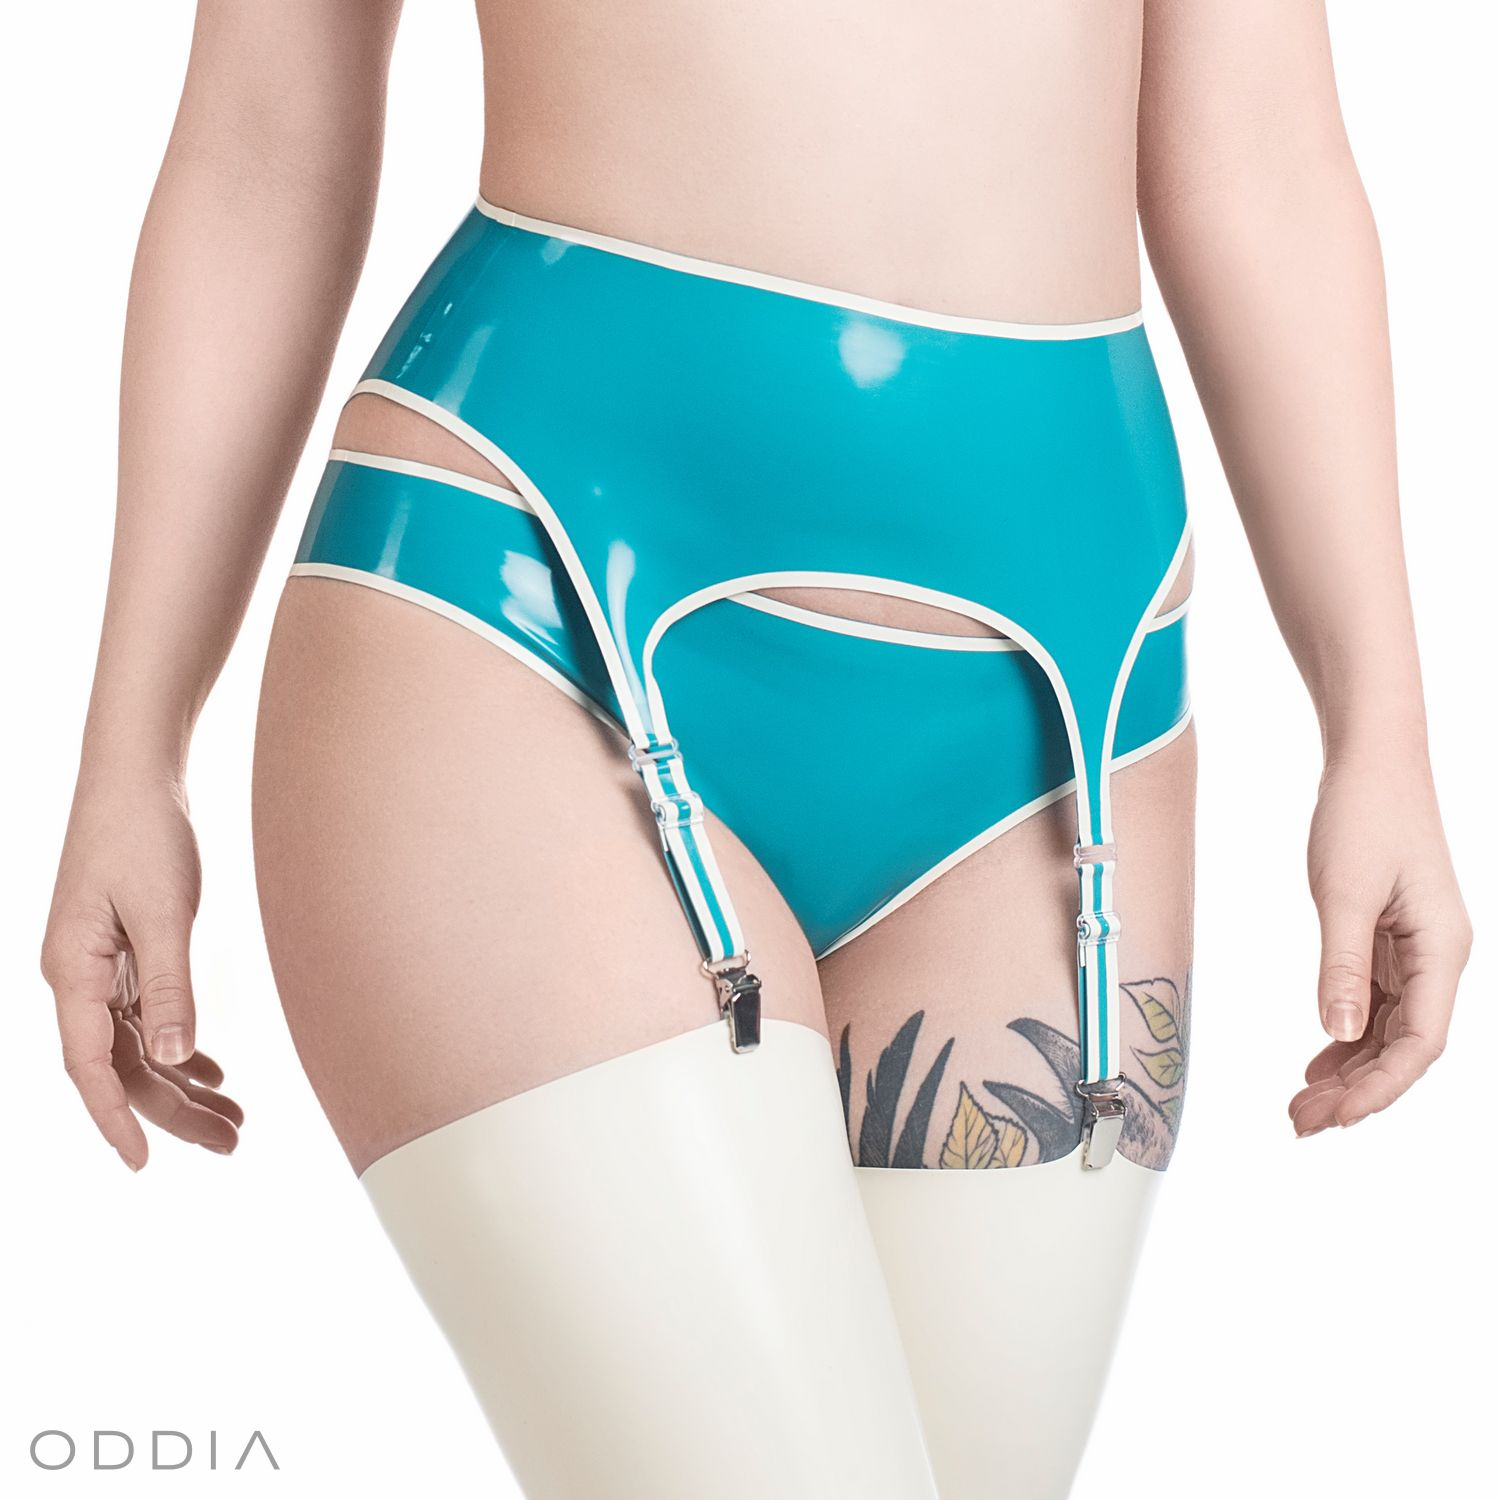 Latex garter belt in turquoise color with a white contrast stripe and four suspenders for attaching stockings